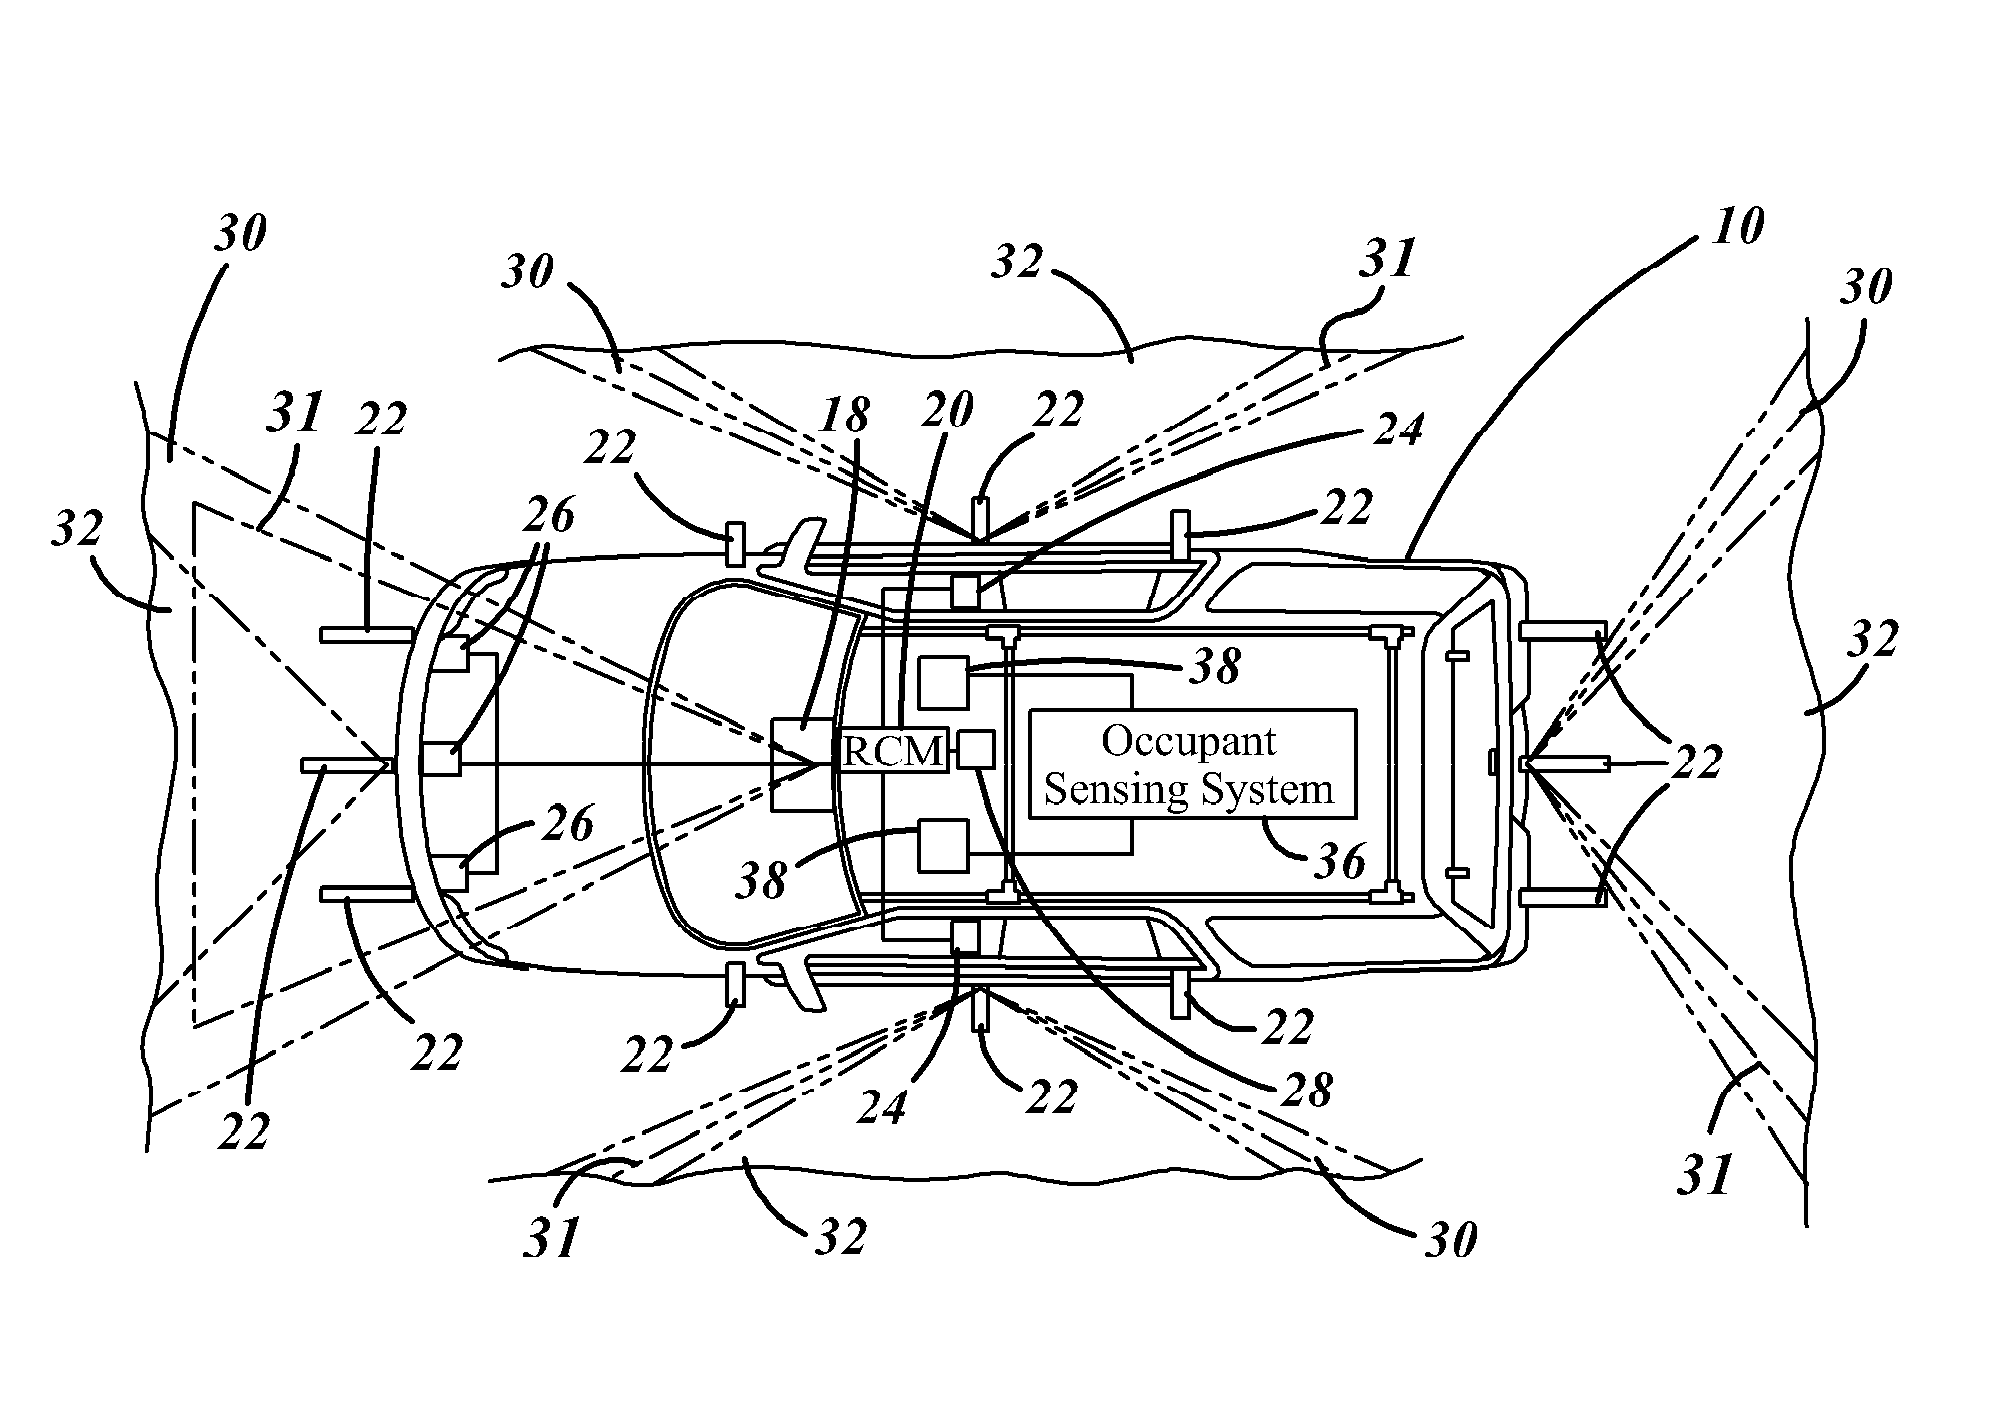 Method for Operating a Pre-Crash Sensing System to Deploy Airbags Using Inflation Control